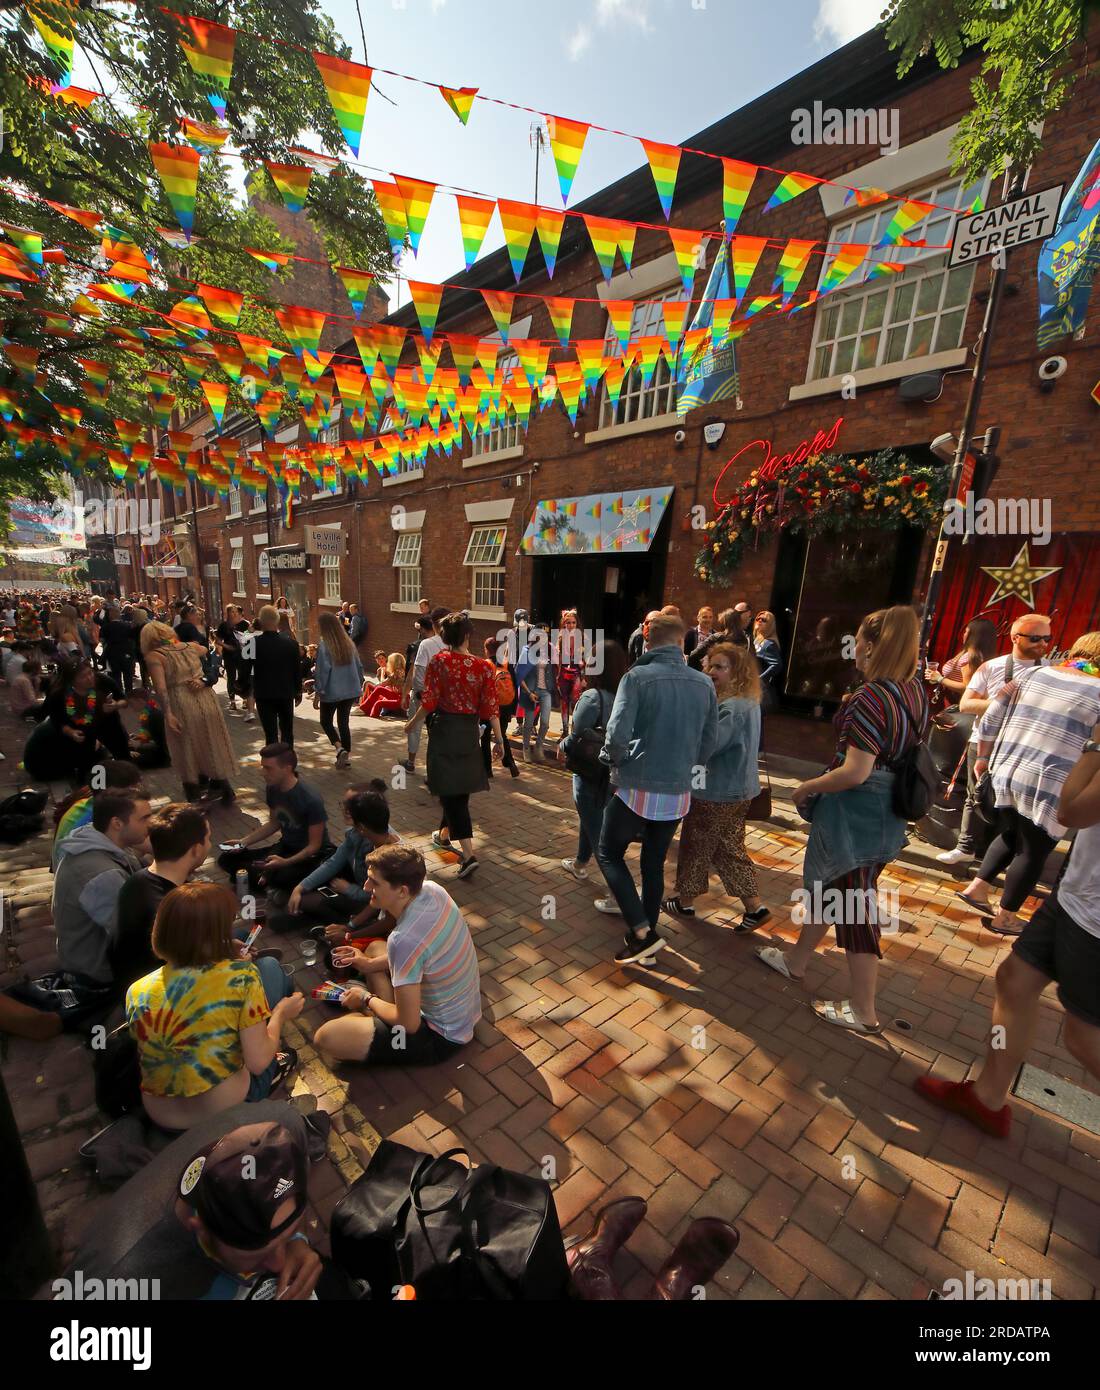 Enjoying Manchester Pride Festival, August bank holiday at the Gay Village, Canal St, Manchester, England, UK, M1 6JB Stock Photo